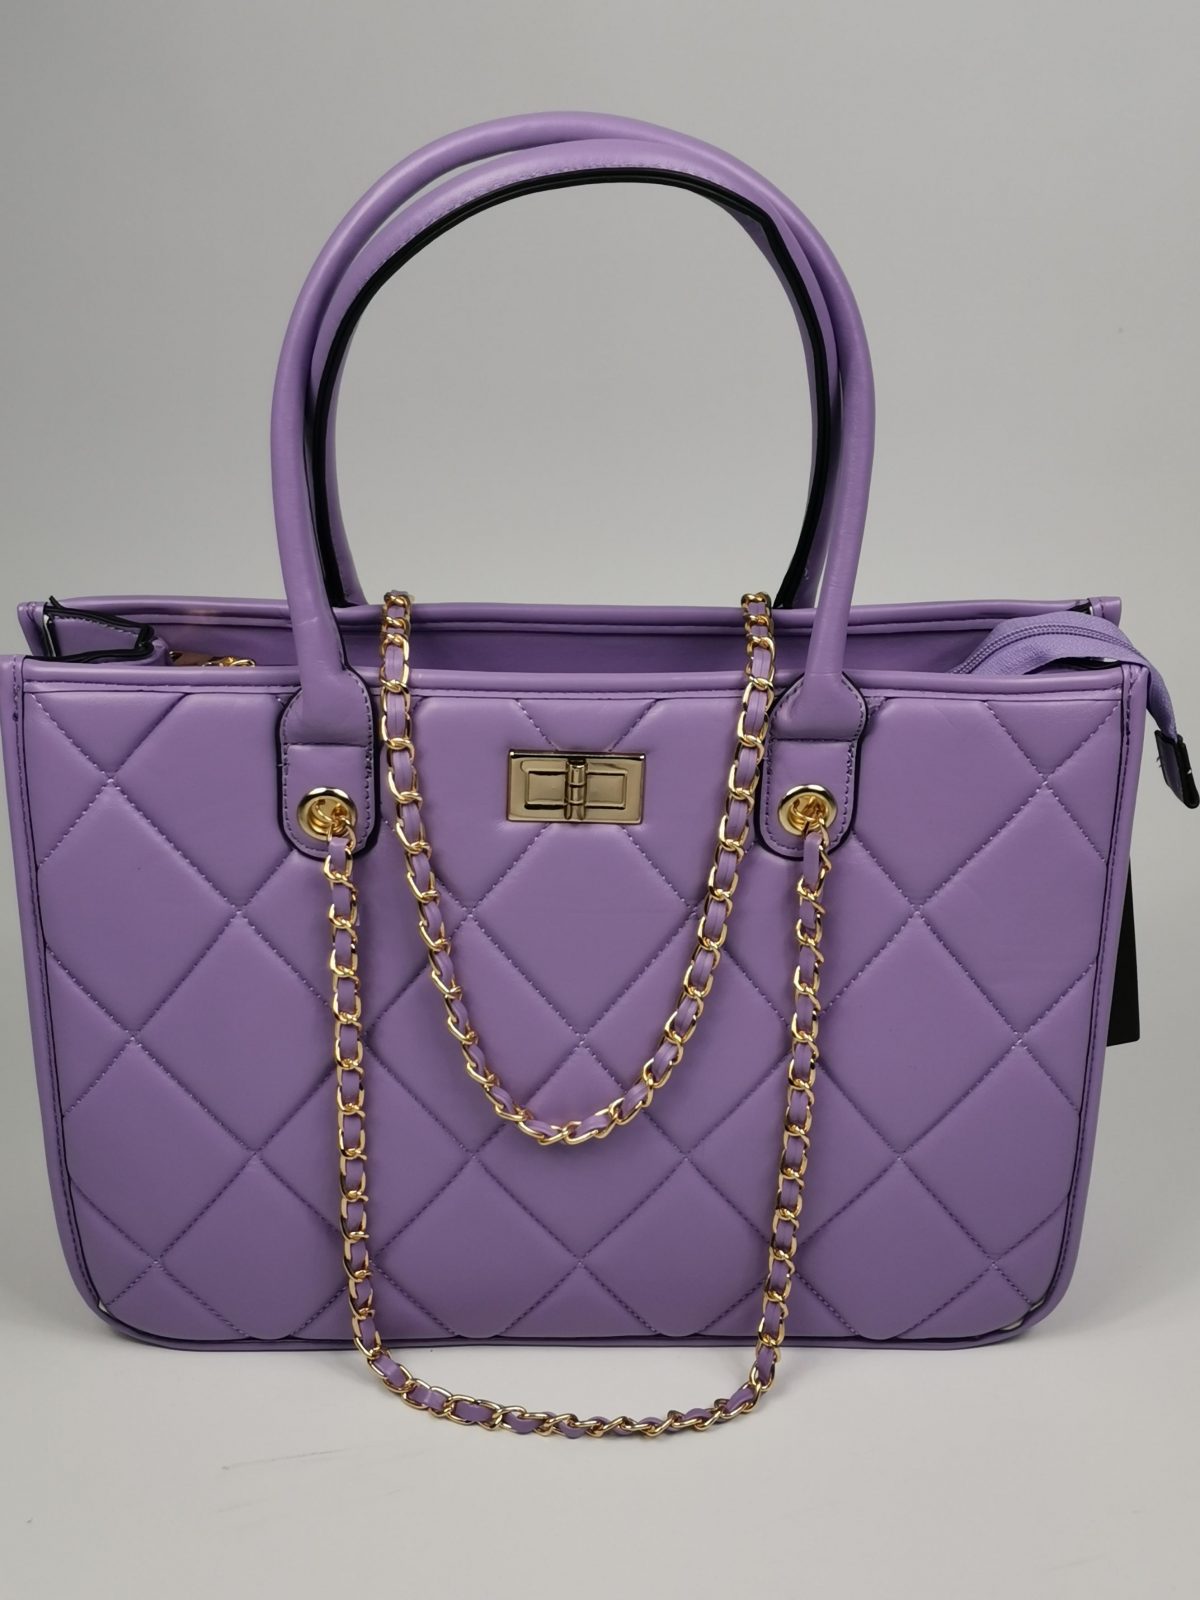 Large handbag in purle with gold chain